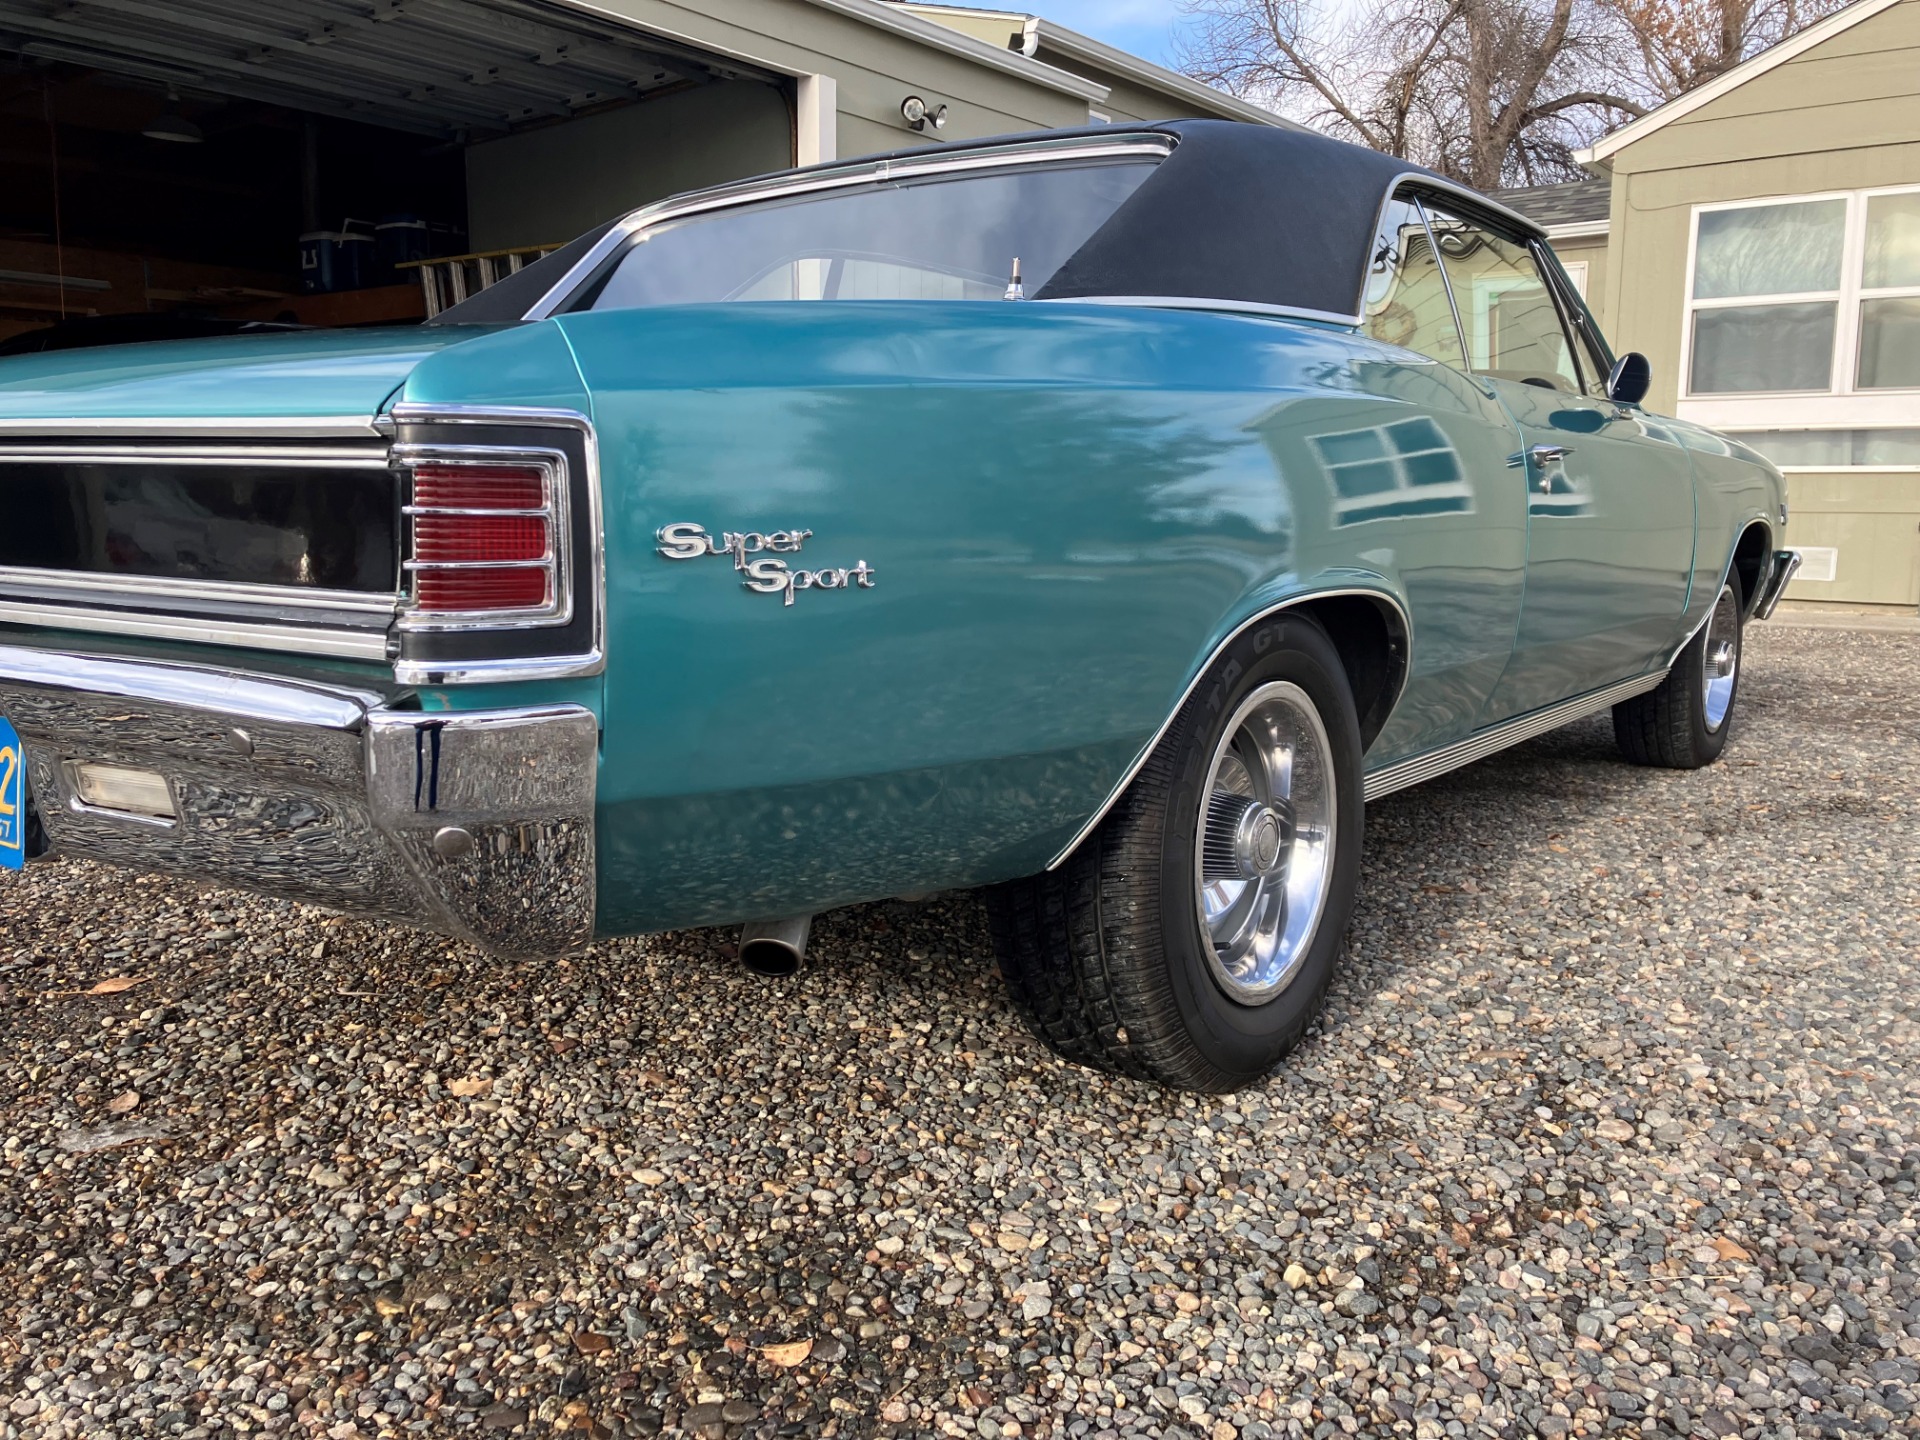 Used 1967 Chevrolet Chevelle SS 396 Tribute Car